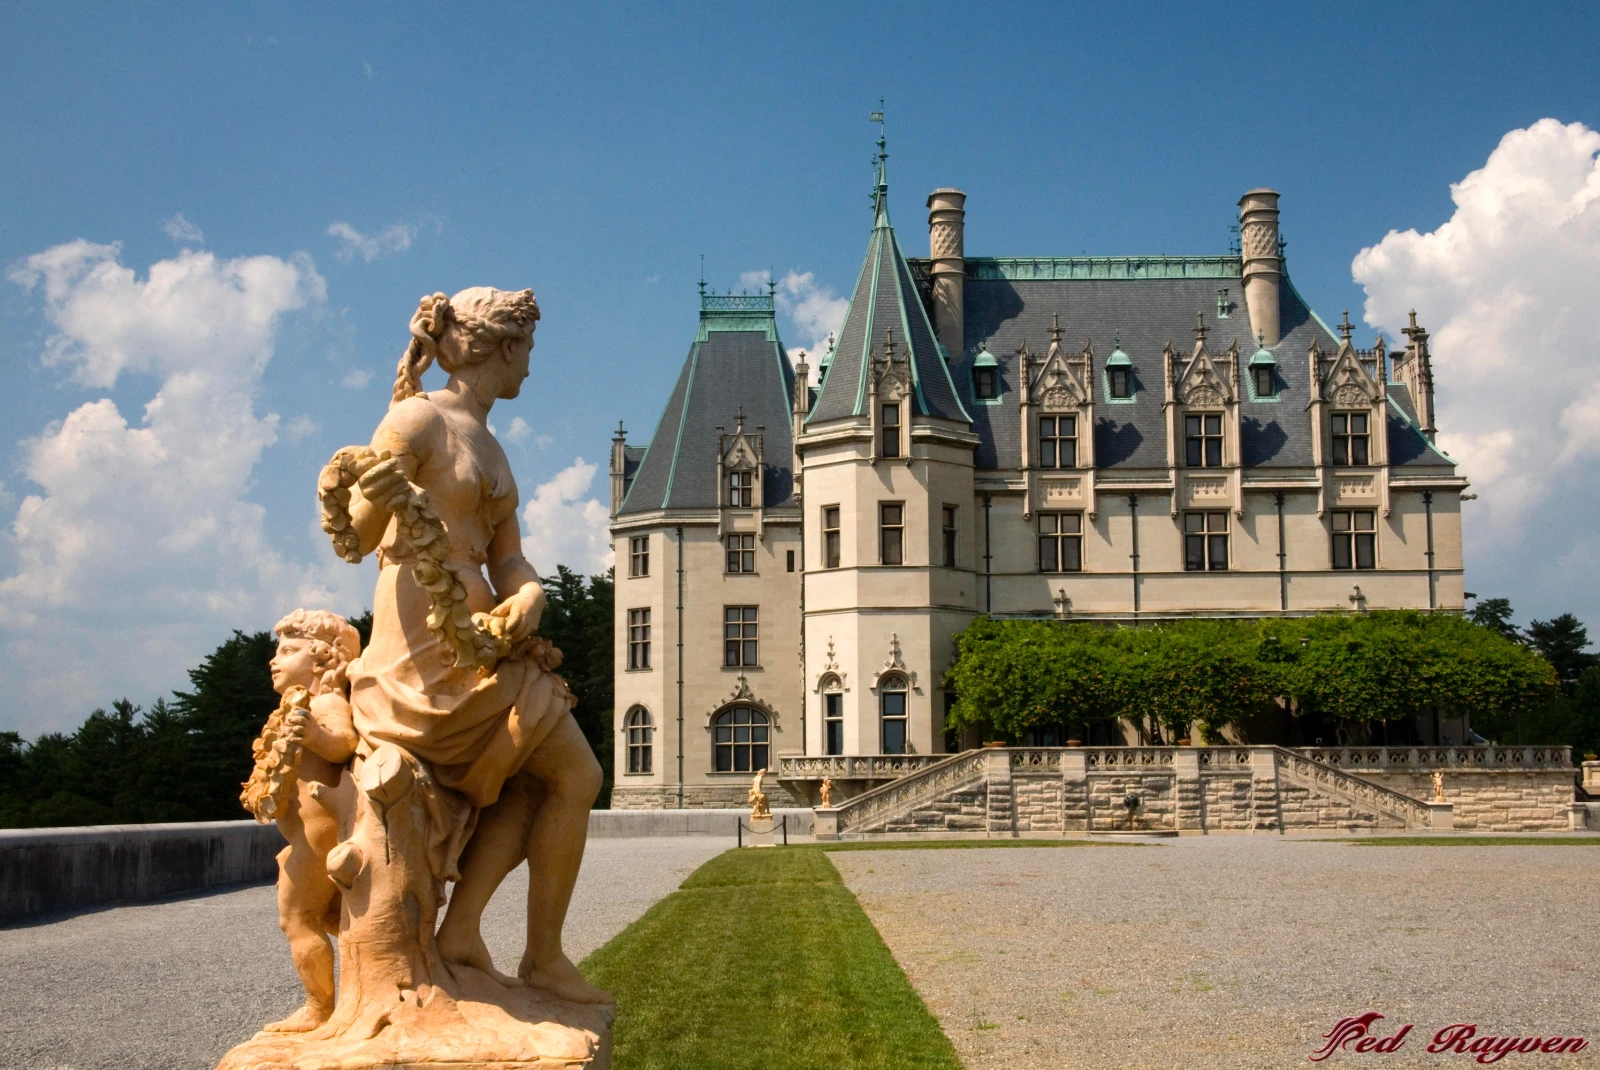 Biltmore Estate is America's largest privately-owned home and historic marvel nestled in the picturesque Blue Ridge Mountains.